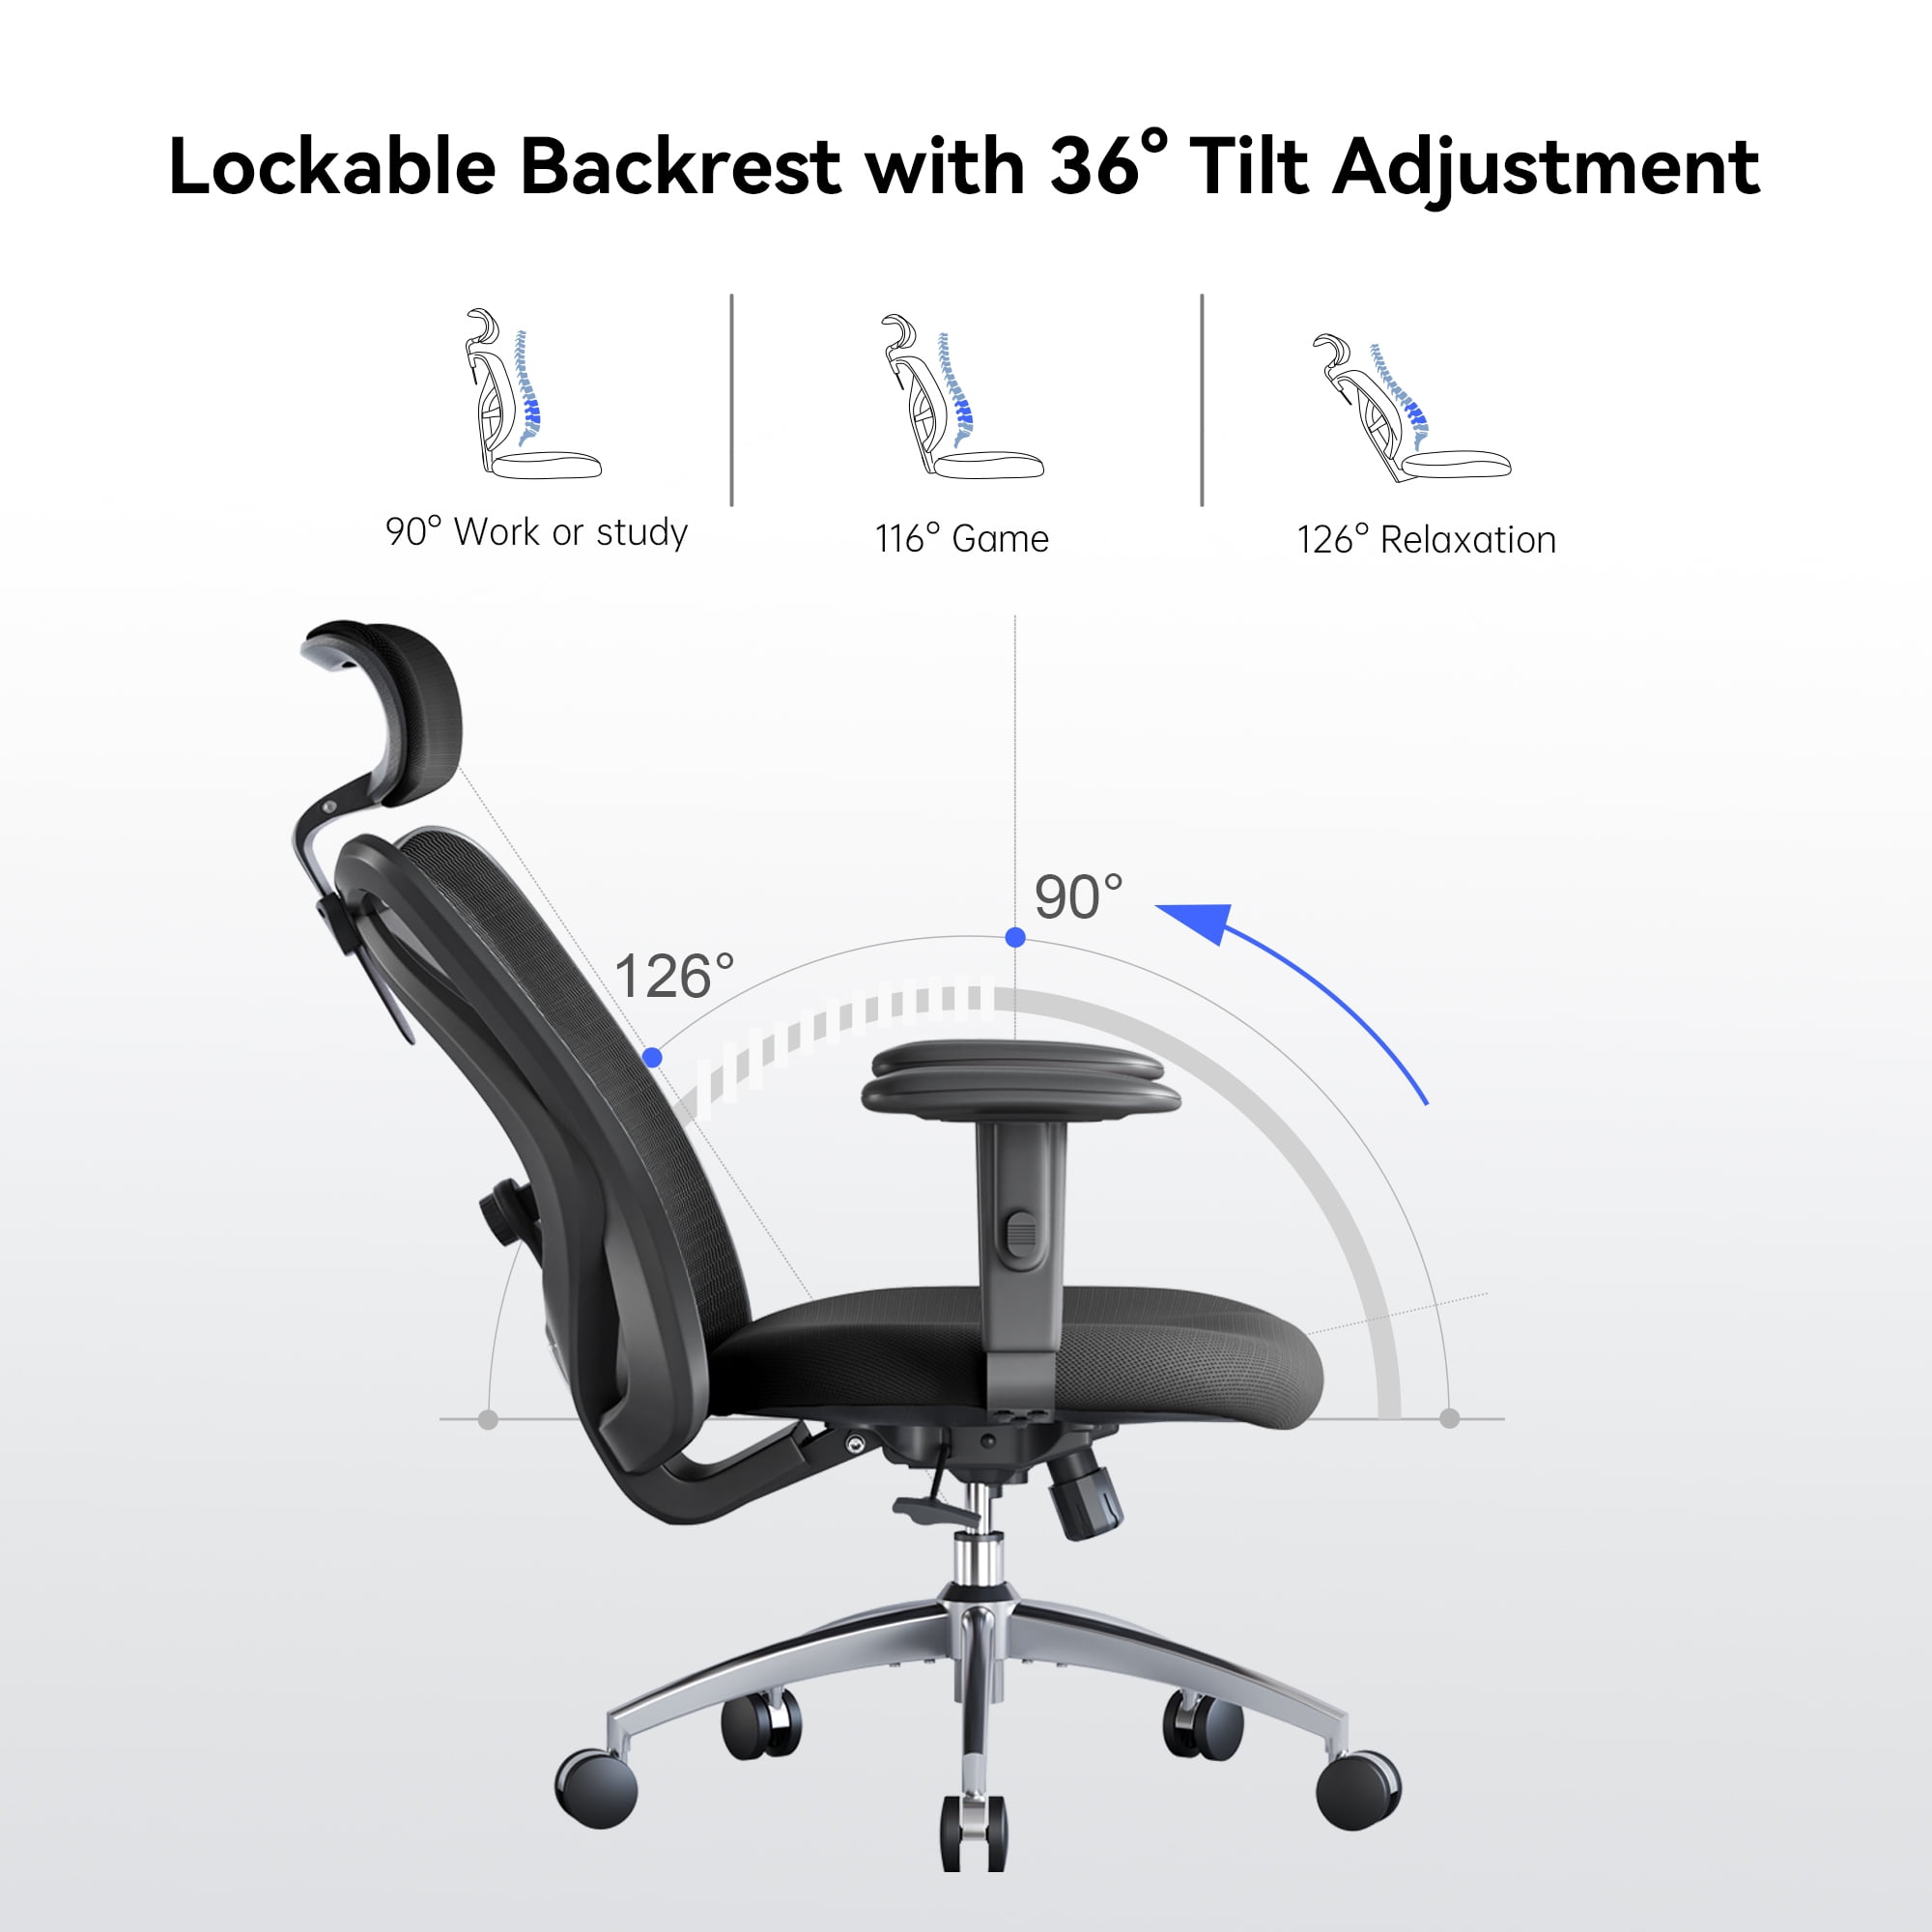 SIHOO Ergonomic Chair with Adjustable Lumbar Support, Wide Thick